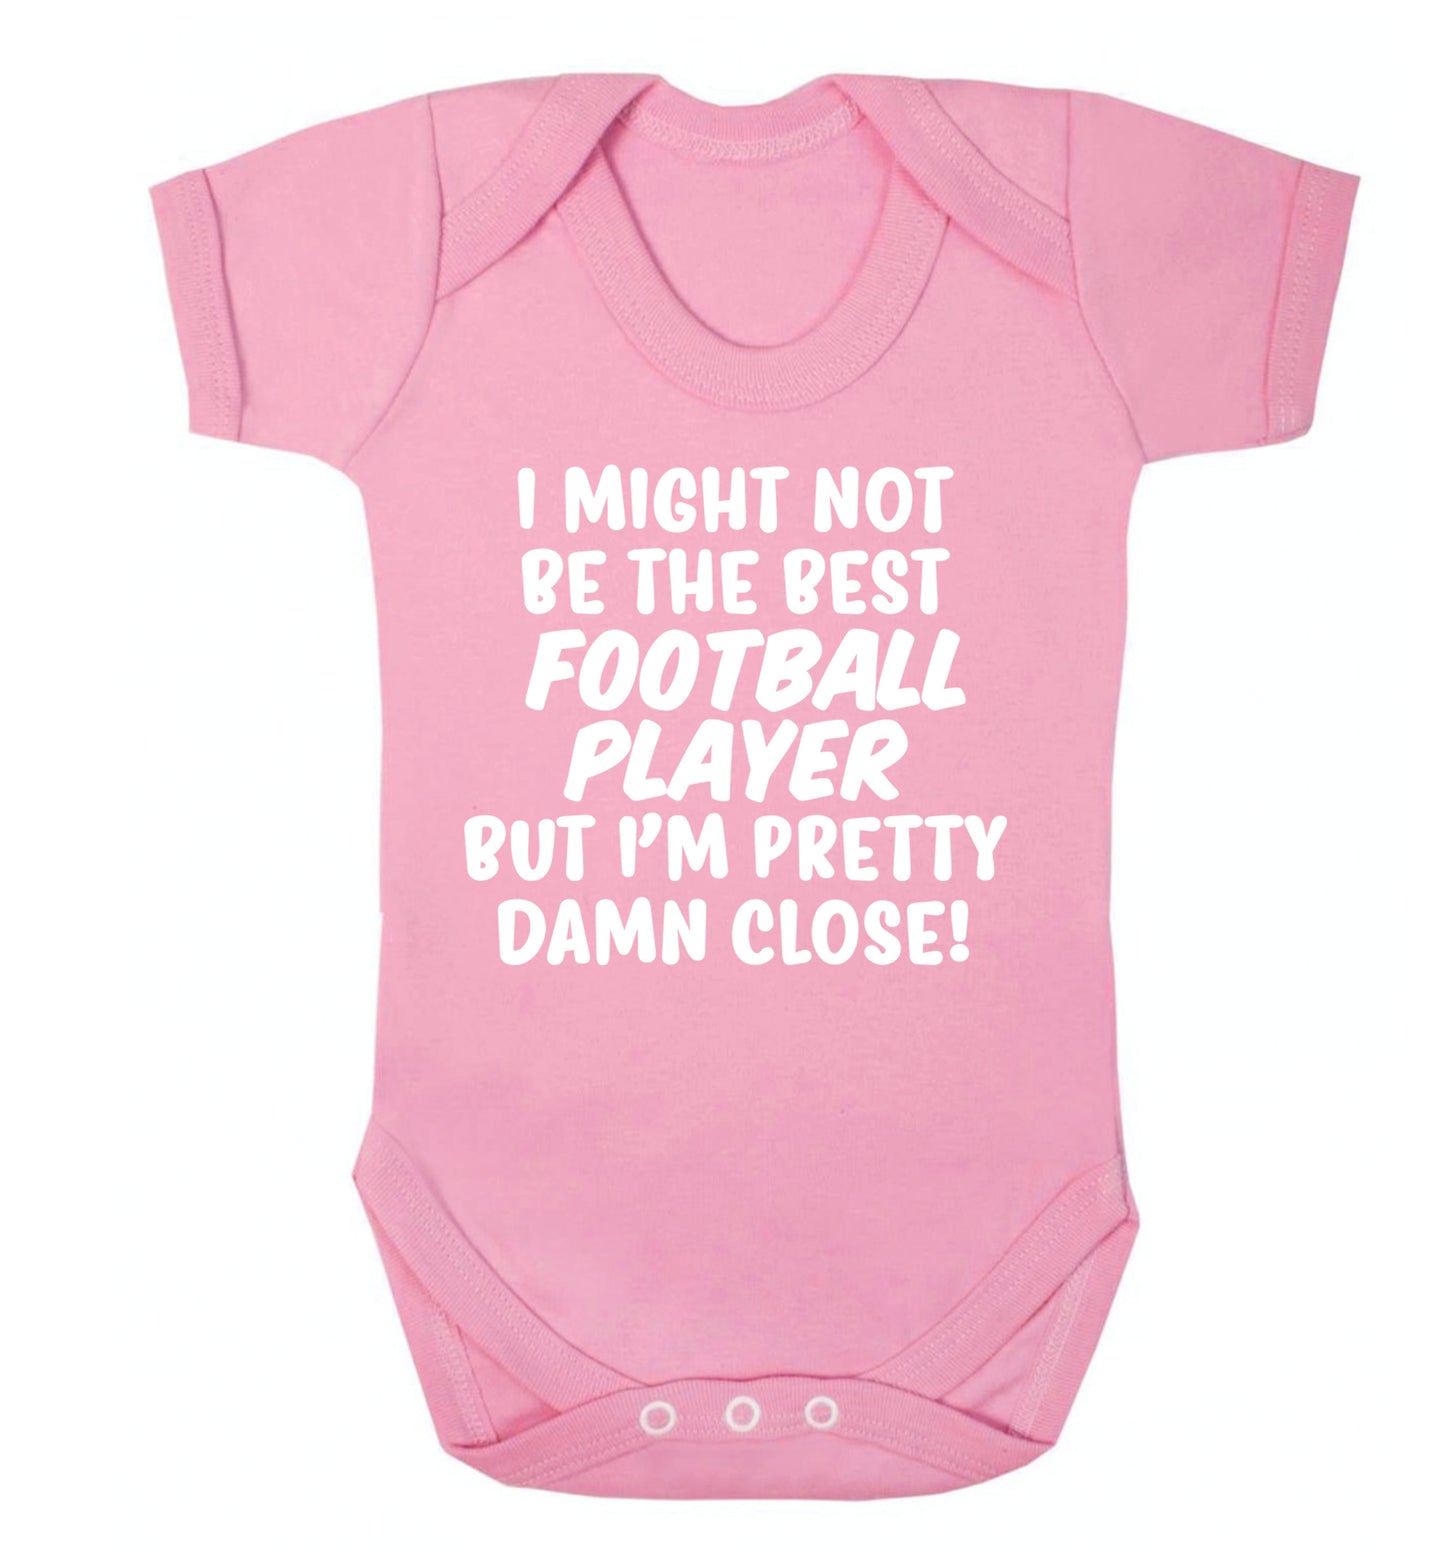 I might not be the best football player but I'm pretty close! Baby Vest pale pink 18-24 months